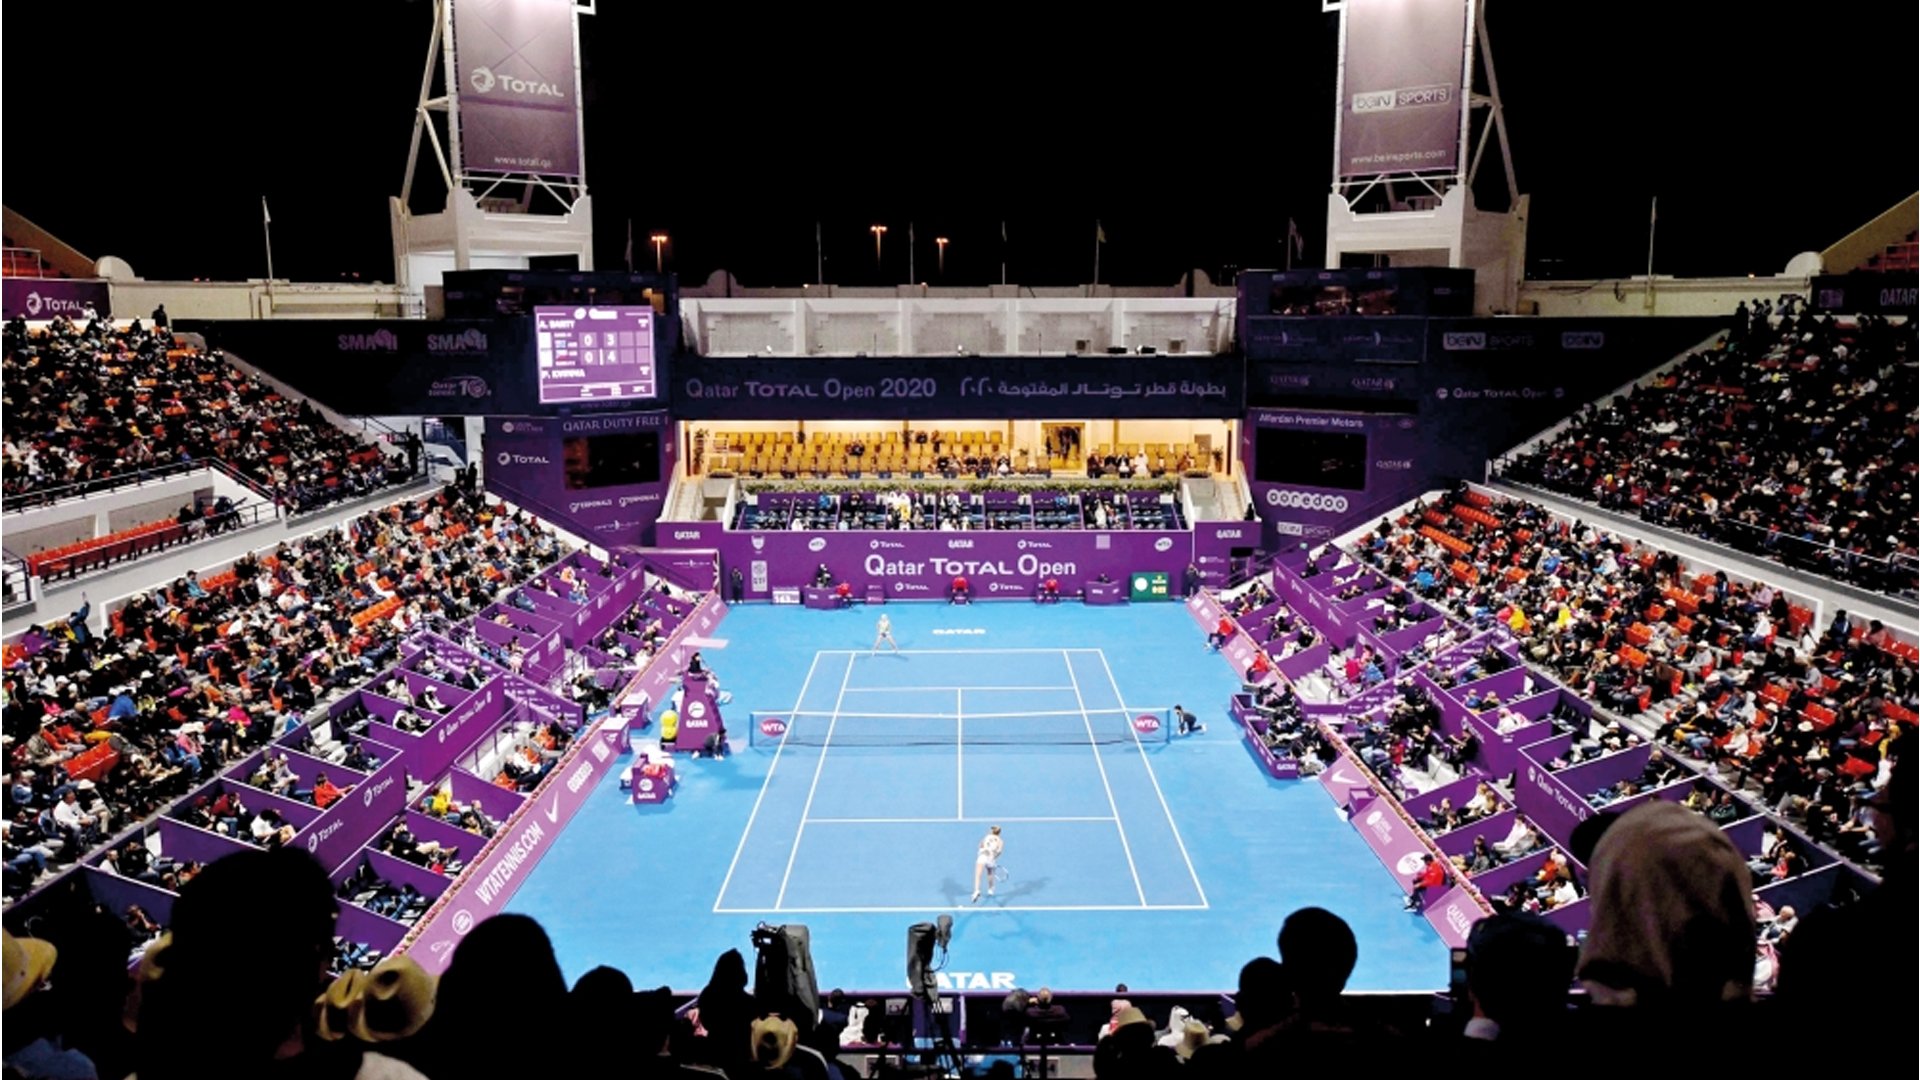 beIN SPORTS to broadcast Qatar Total Open and Qatar ExxonMobil Open 2021